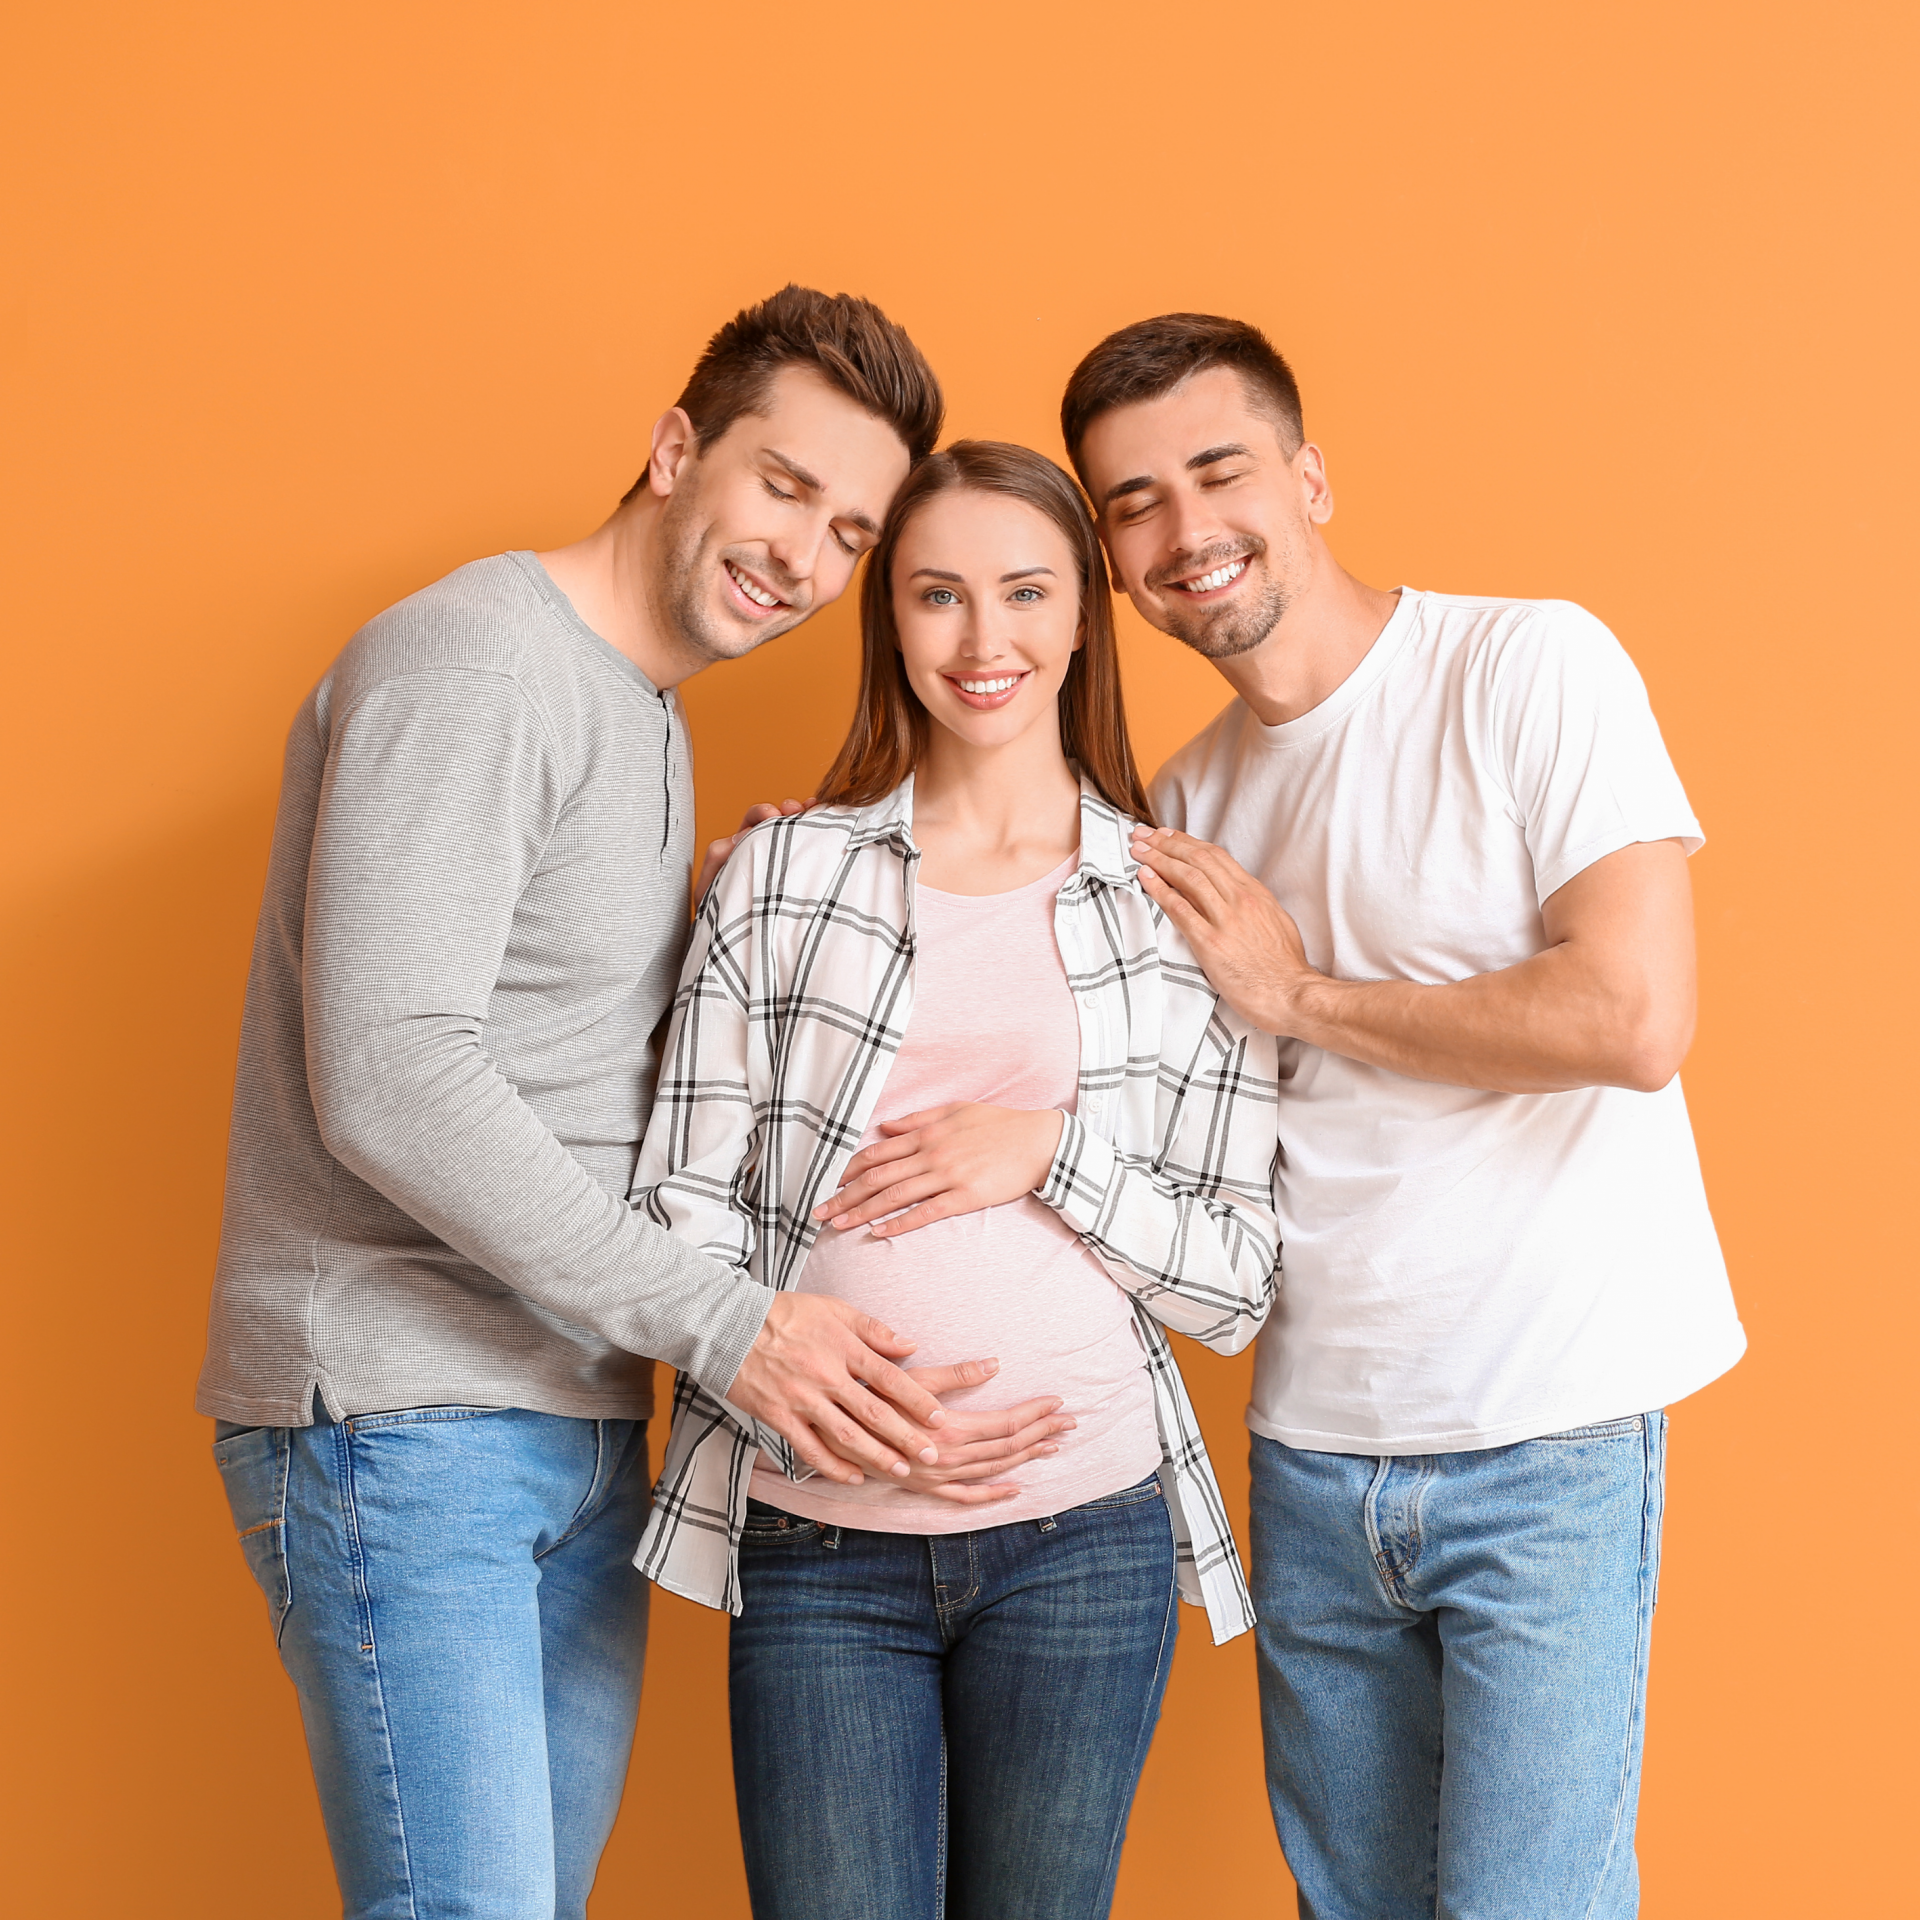 A surrogacy team pictured with a surrogate in the middle and her two same sex intended parents either side